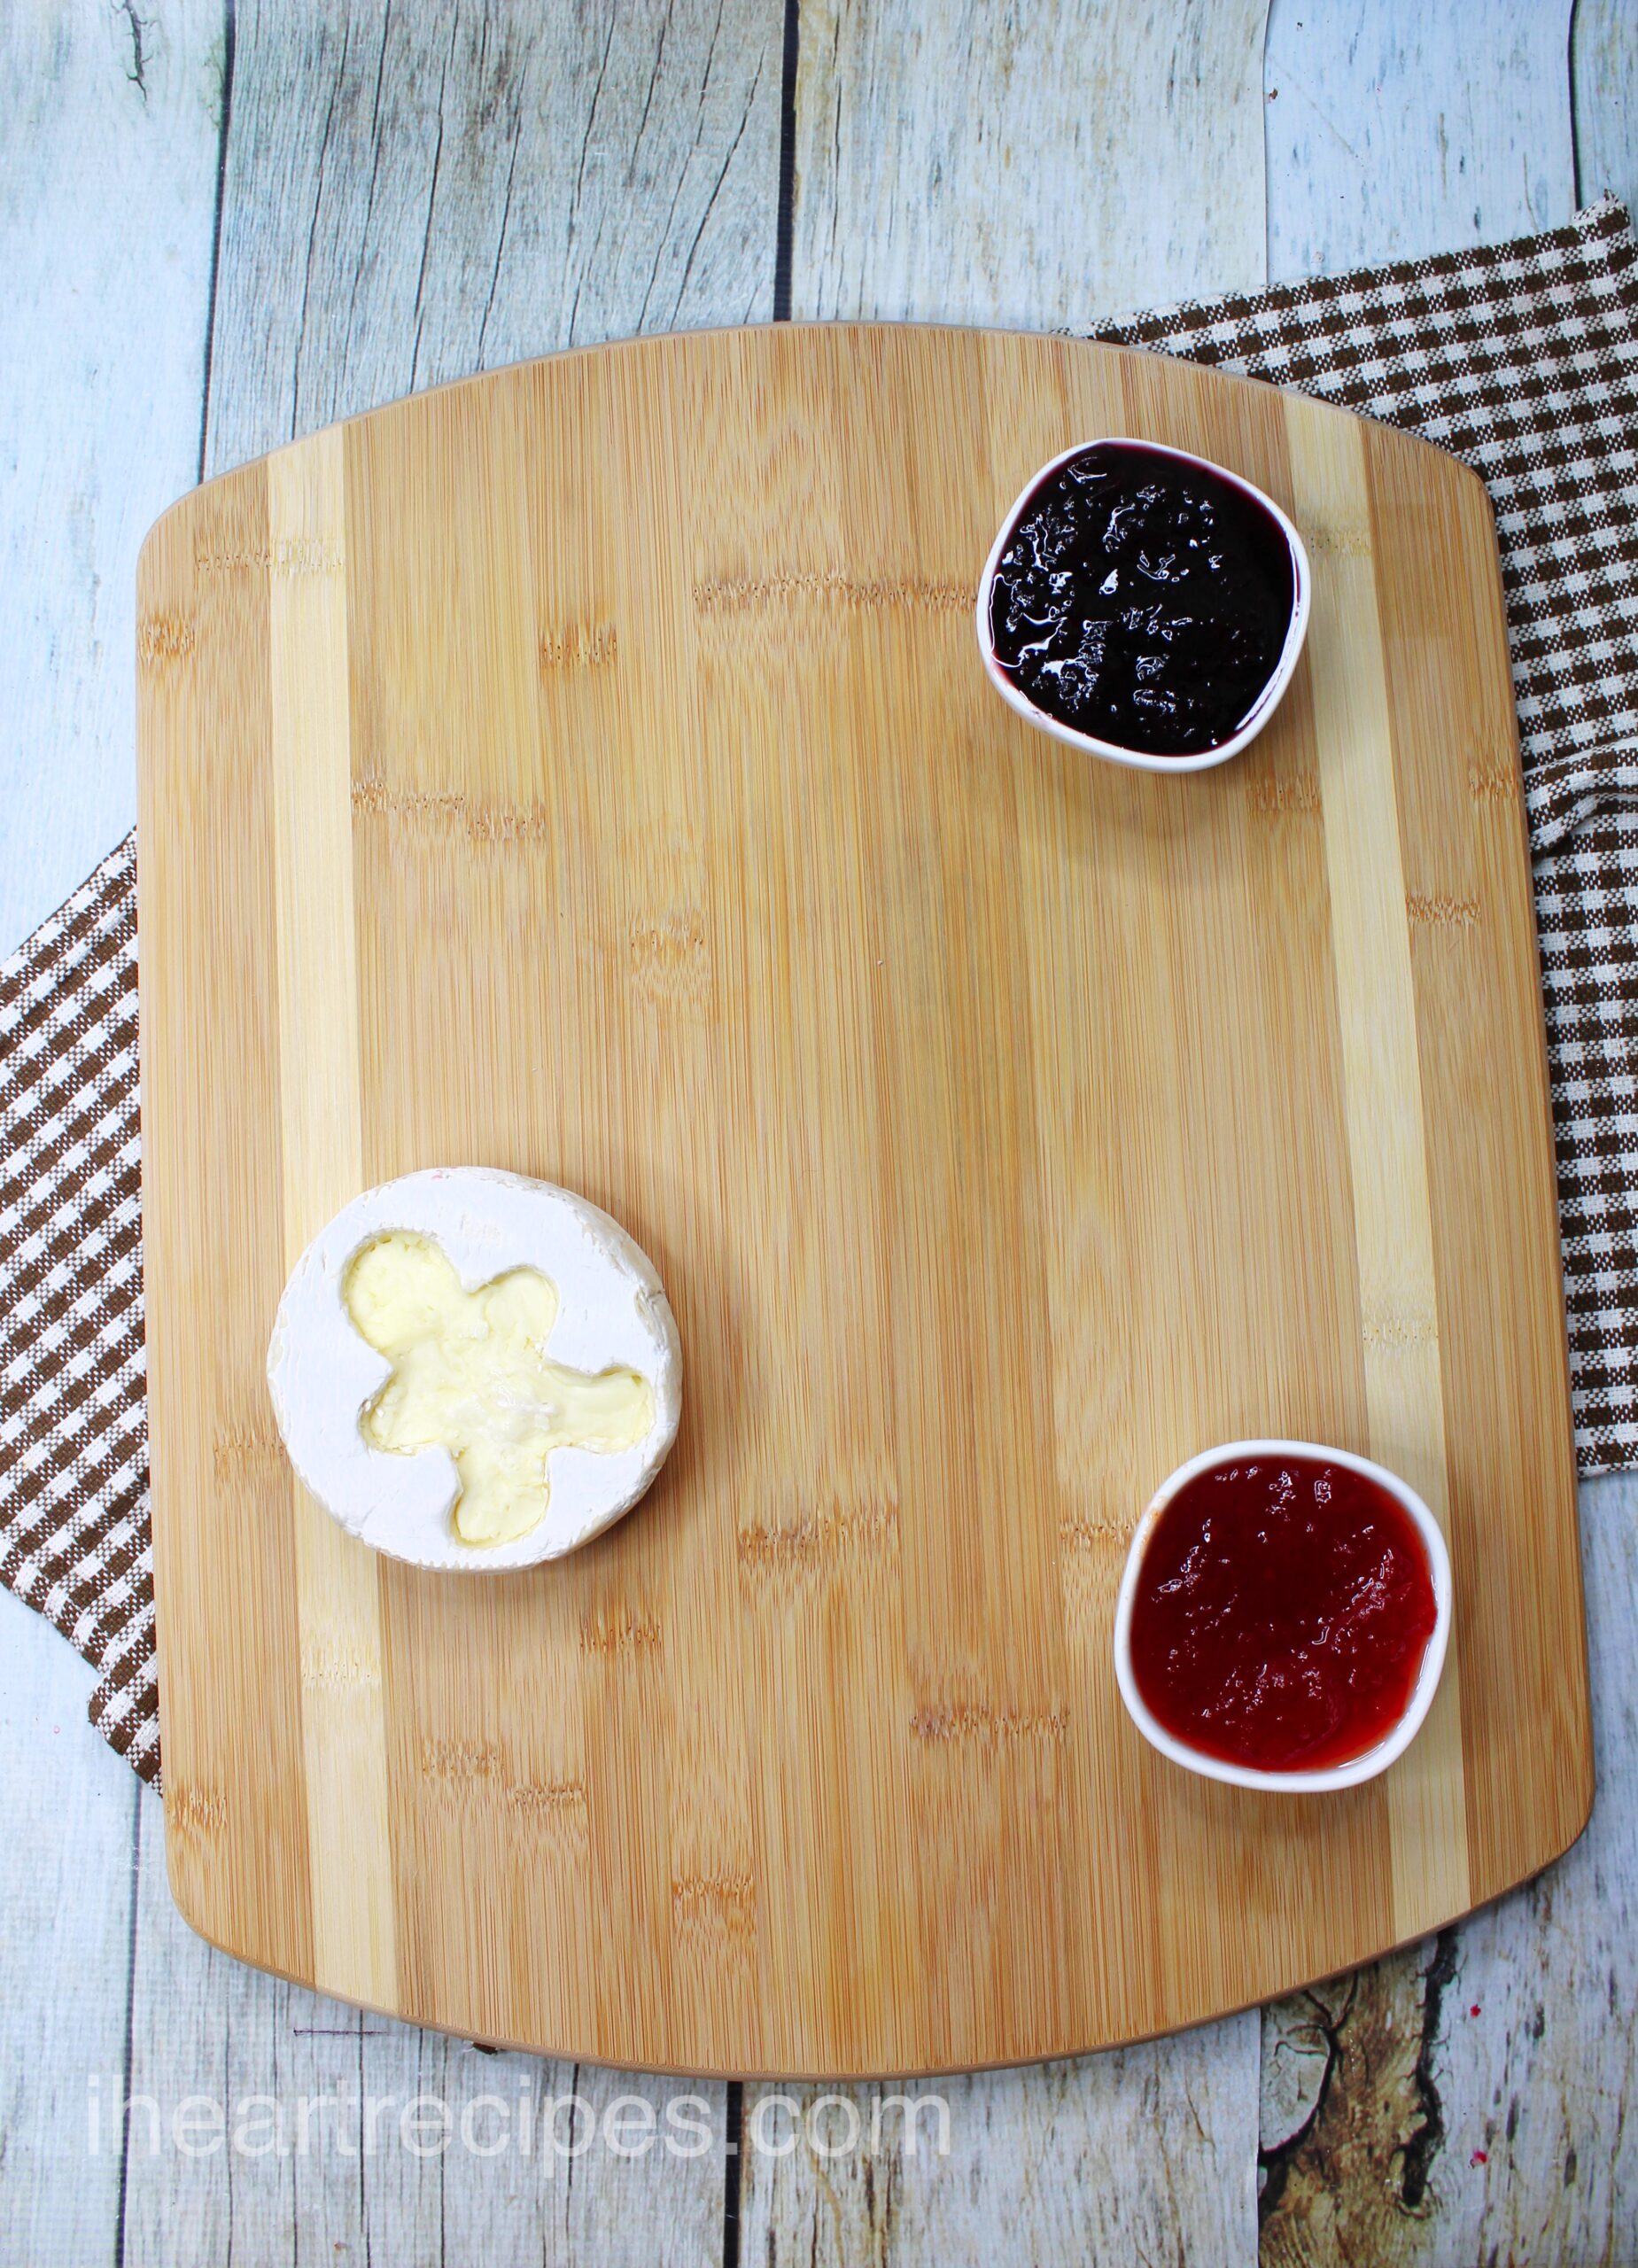 An overhead image of a wooden cutting board with two dishes of fruit jam, and one small wheel of brie cheese with a gingerbread man shape cut out of the crust of the cheese.